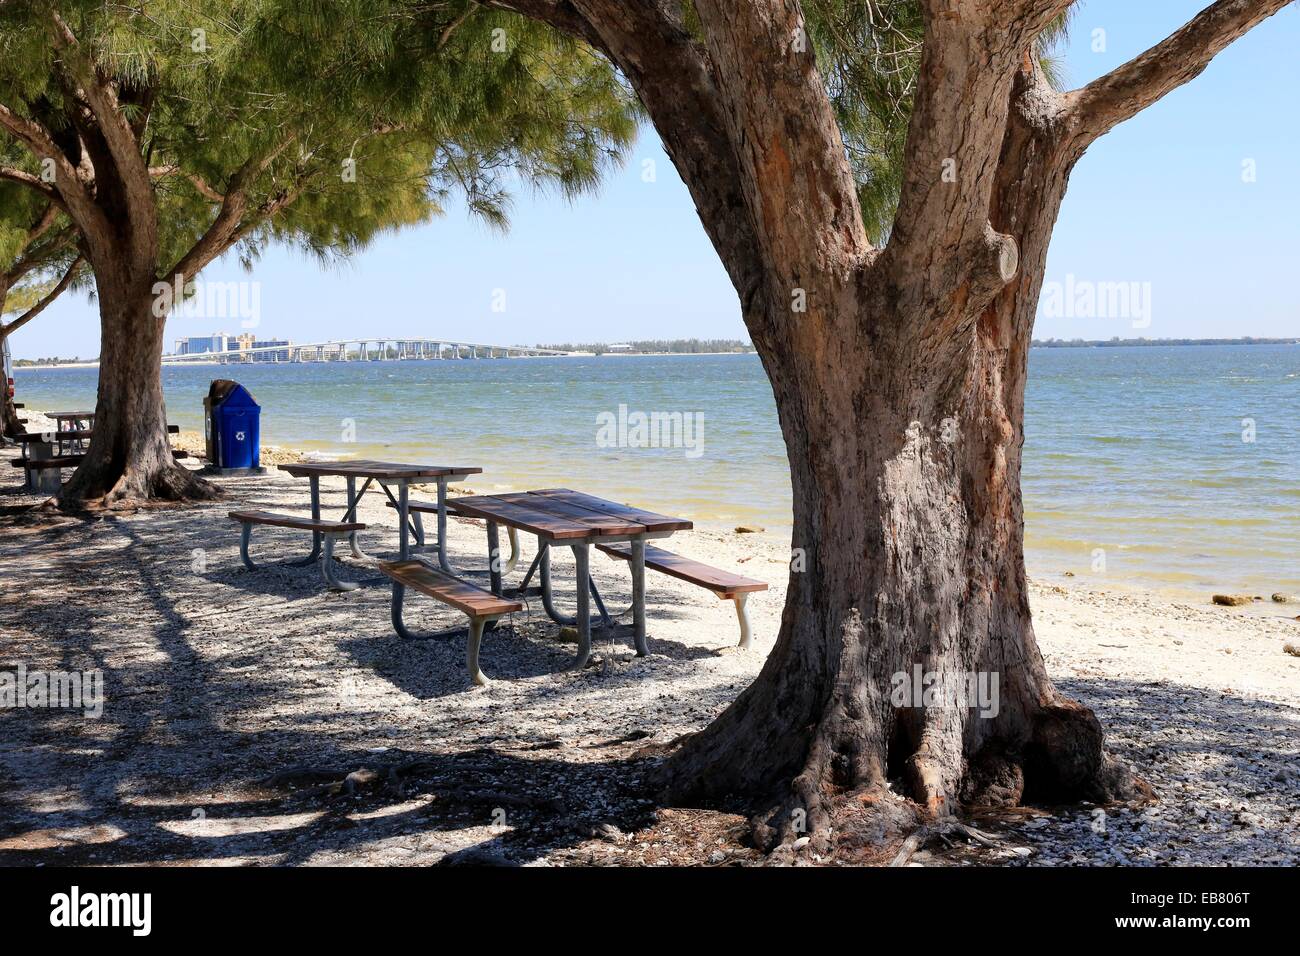 A picnic park and beach on Sanibel Island near Ft. Myers in Florida, USA Stock Photo